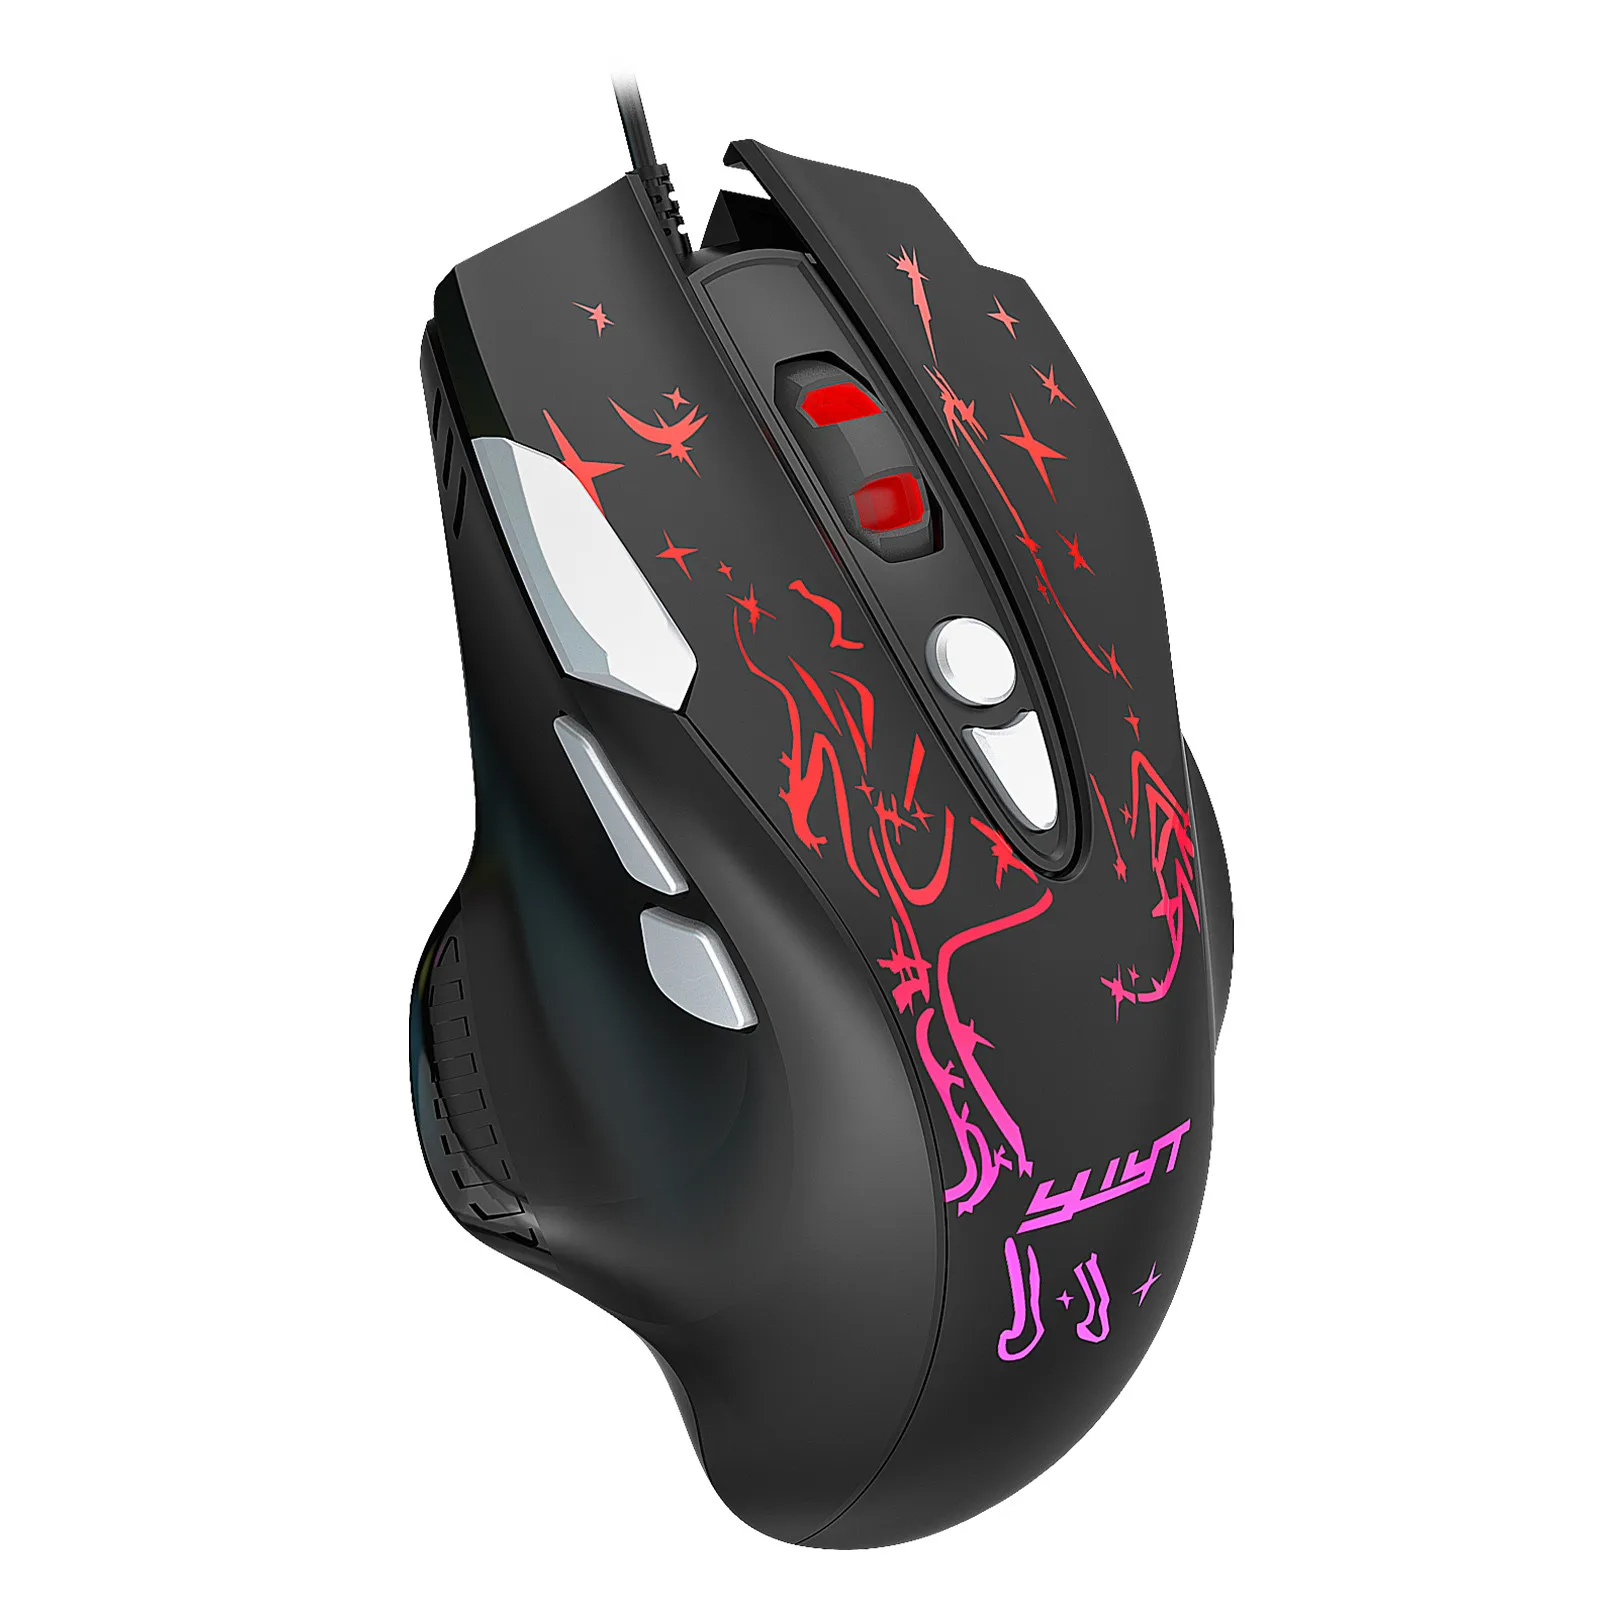 

Mechanical Define the game USB Wired 6400DPI Adjustable Gaming Mouse Mice For PC RGB Backlight Wired Mice with Fire Key#T2